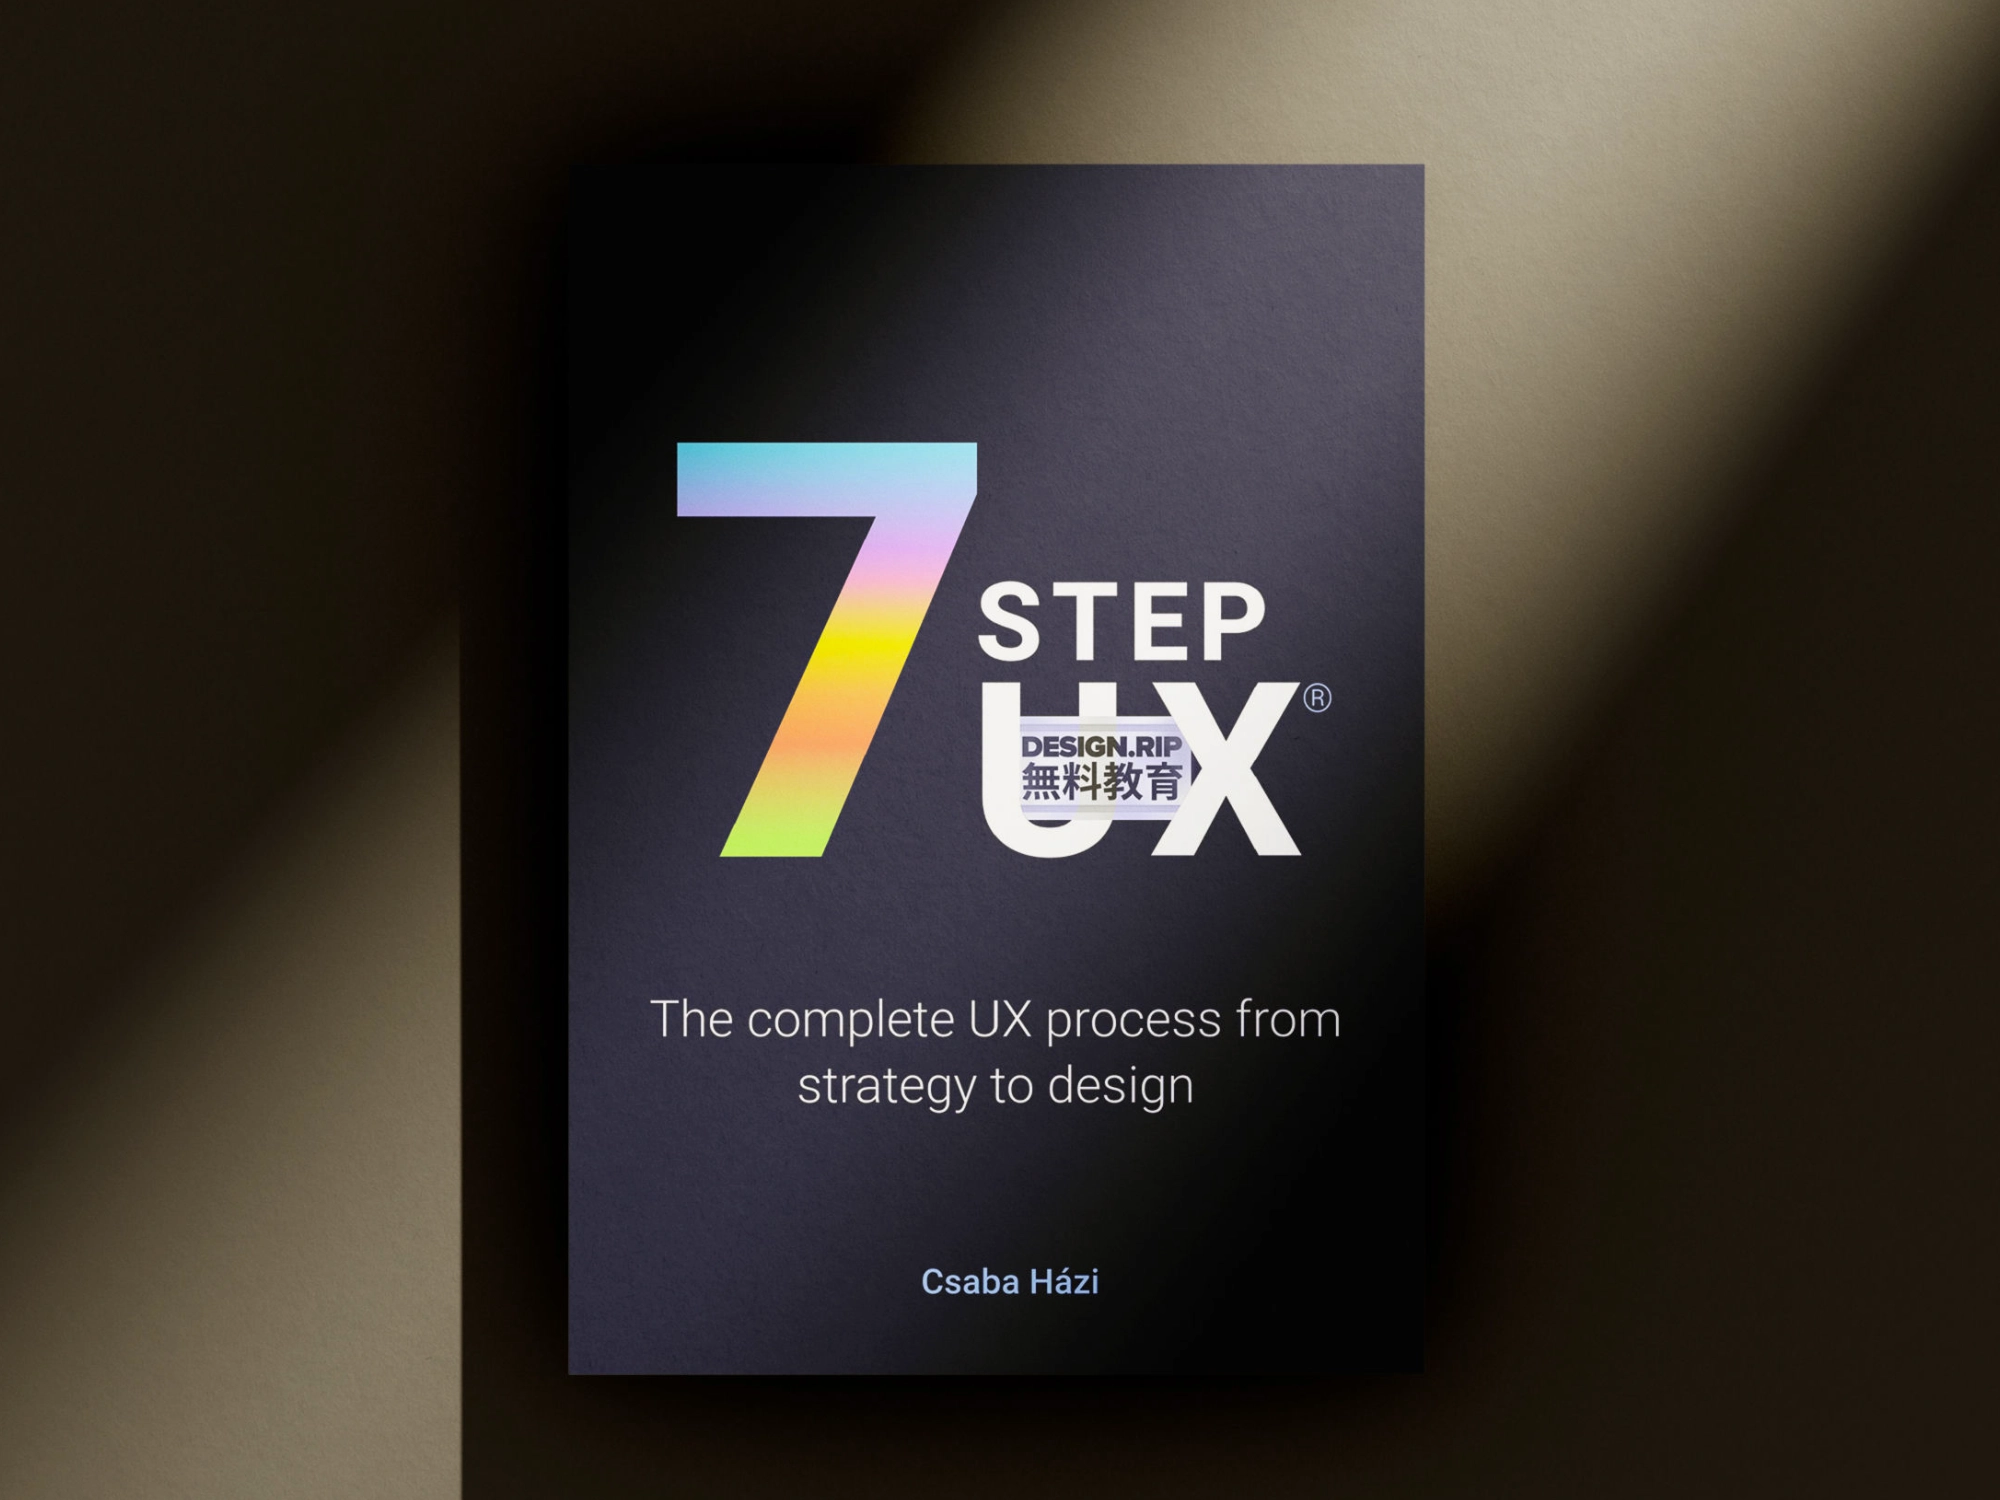 7STEPUX: The complete UX process from strategy to design